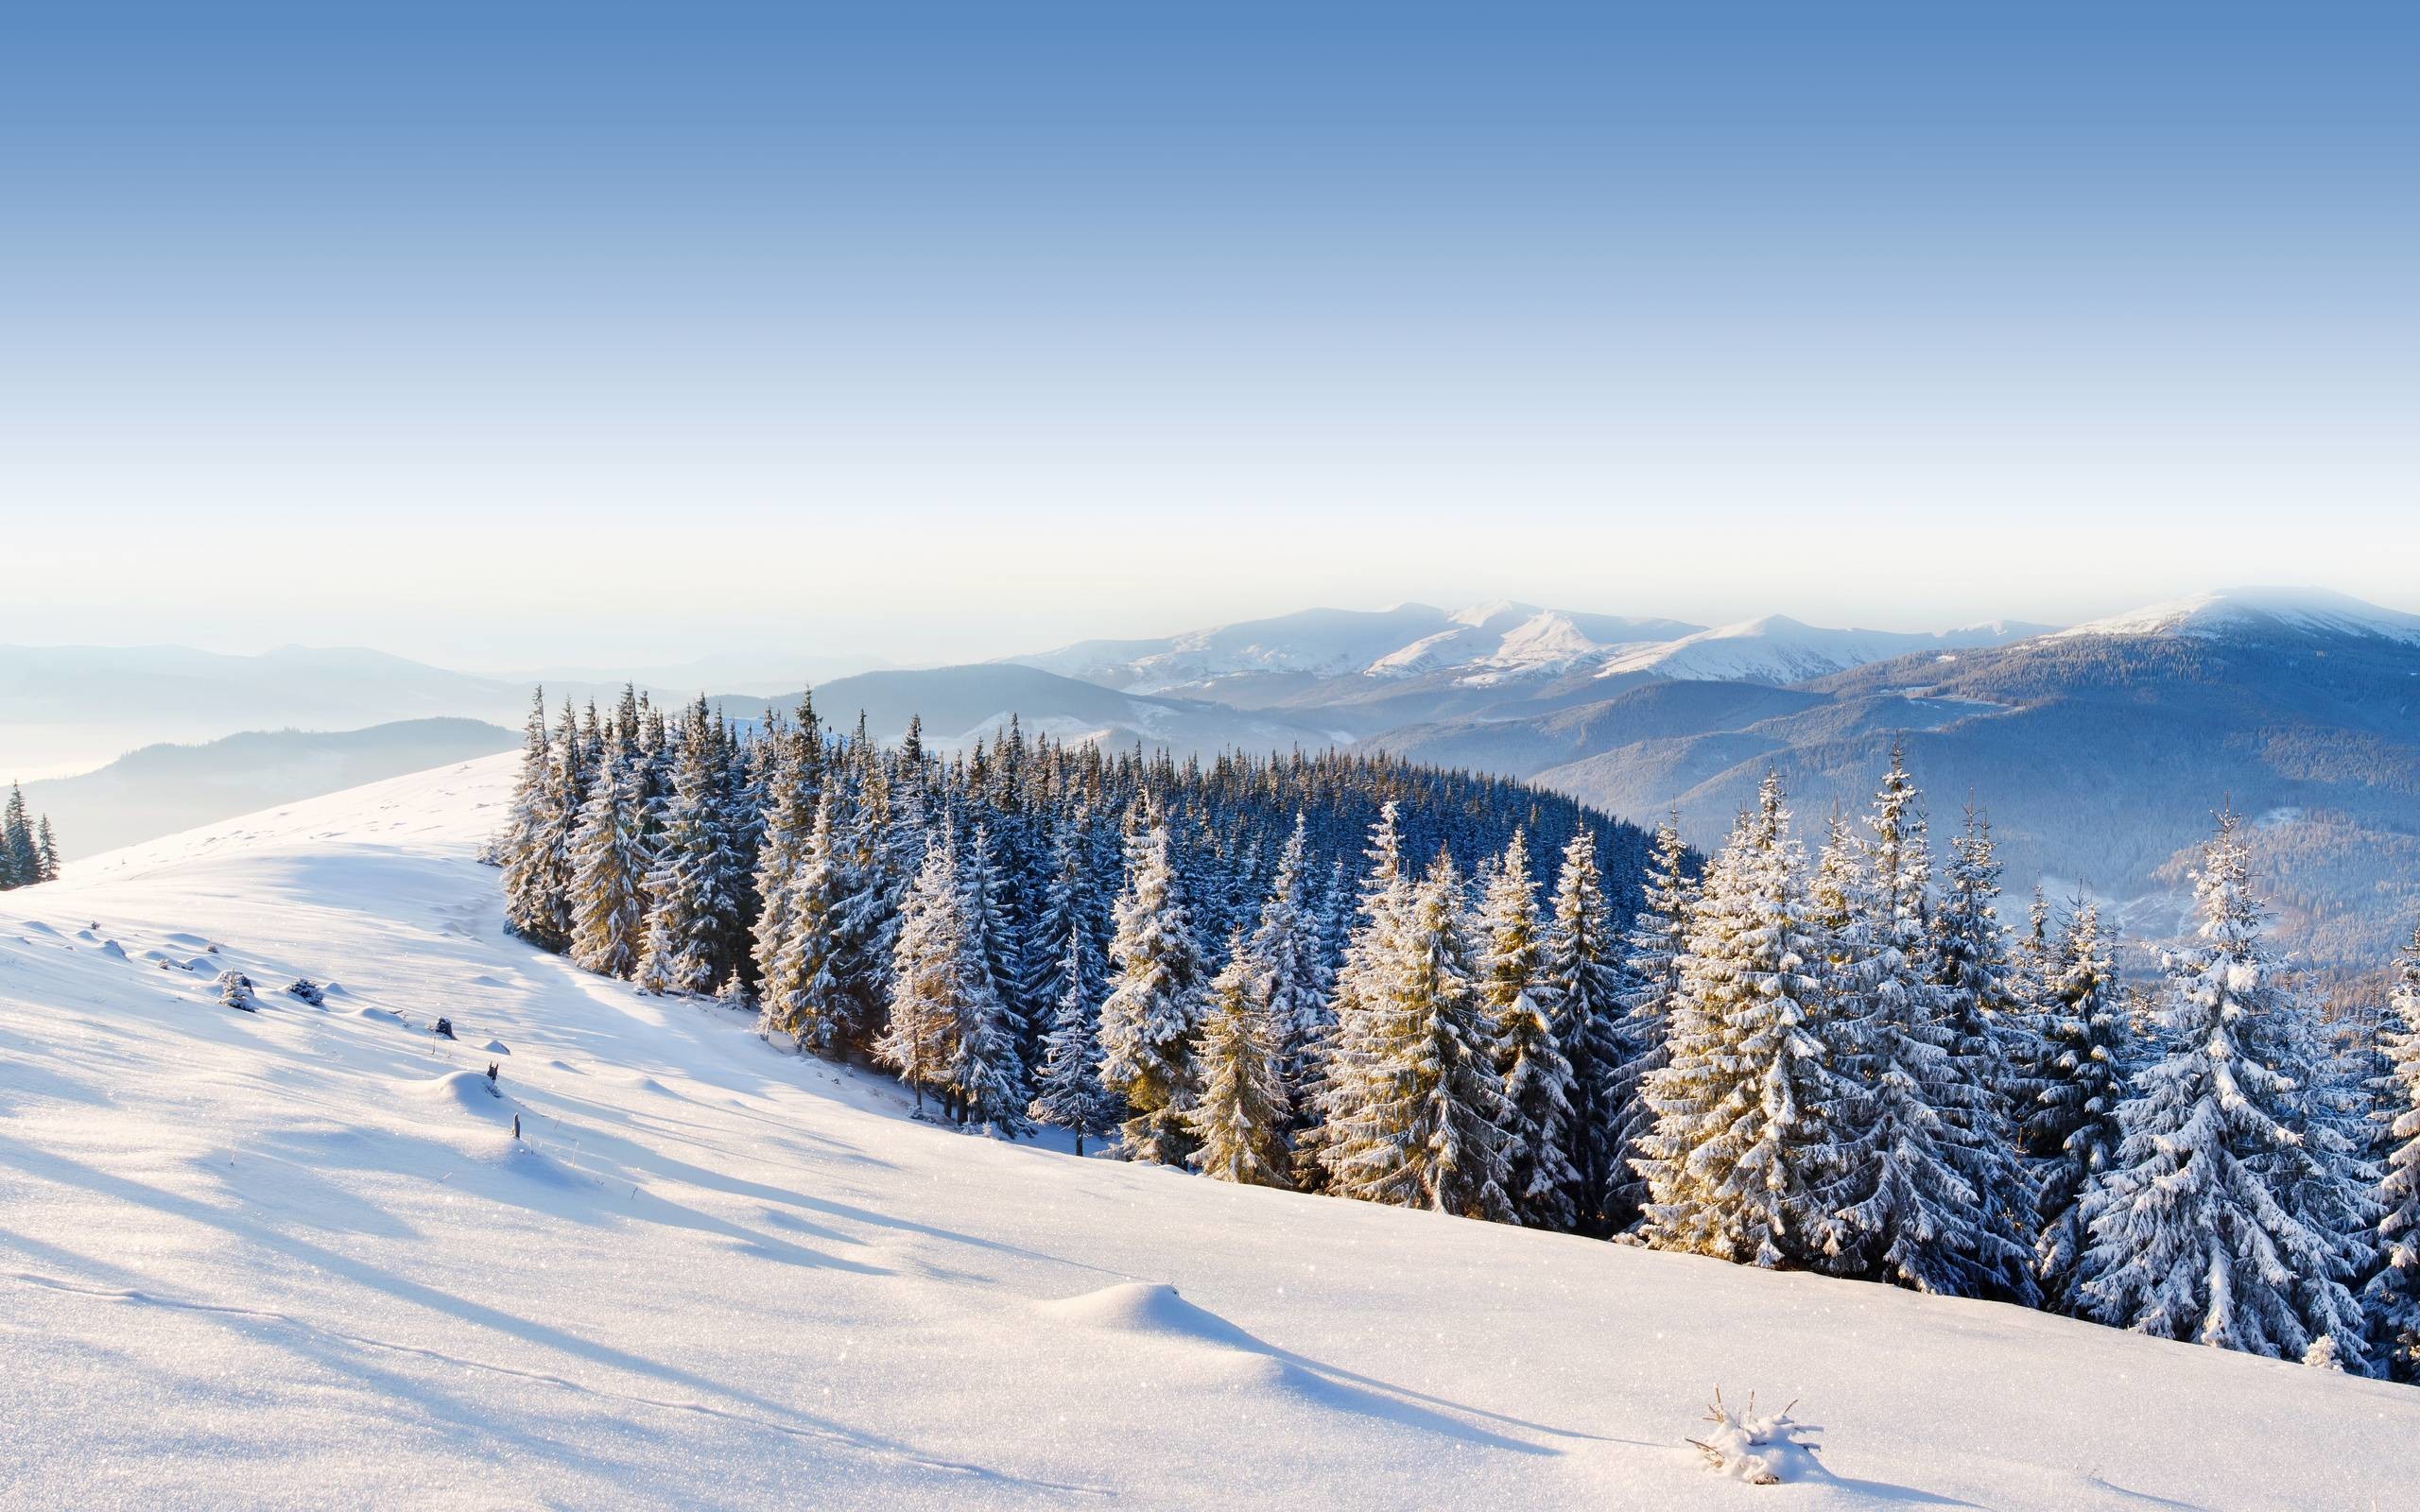 Forest Snowy Winter Mountains Wallpapers